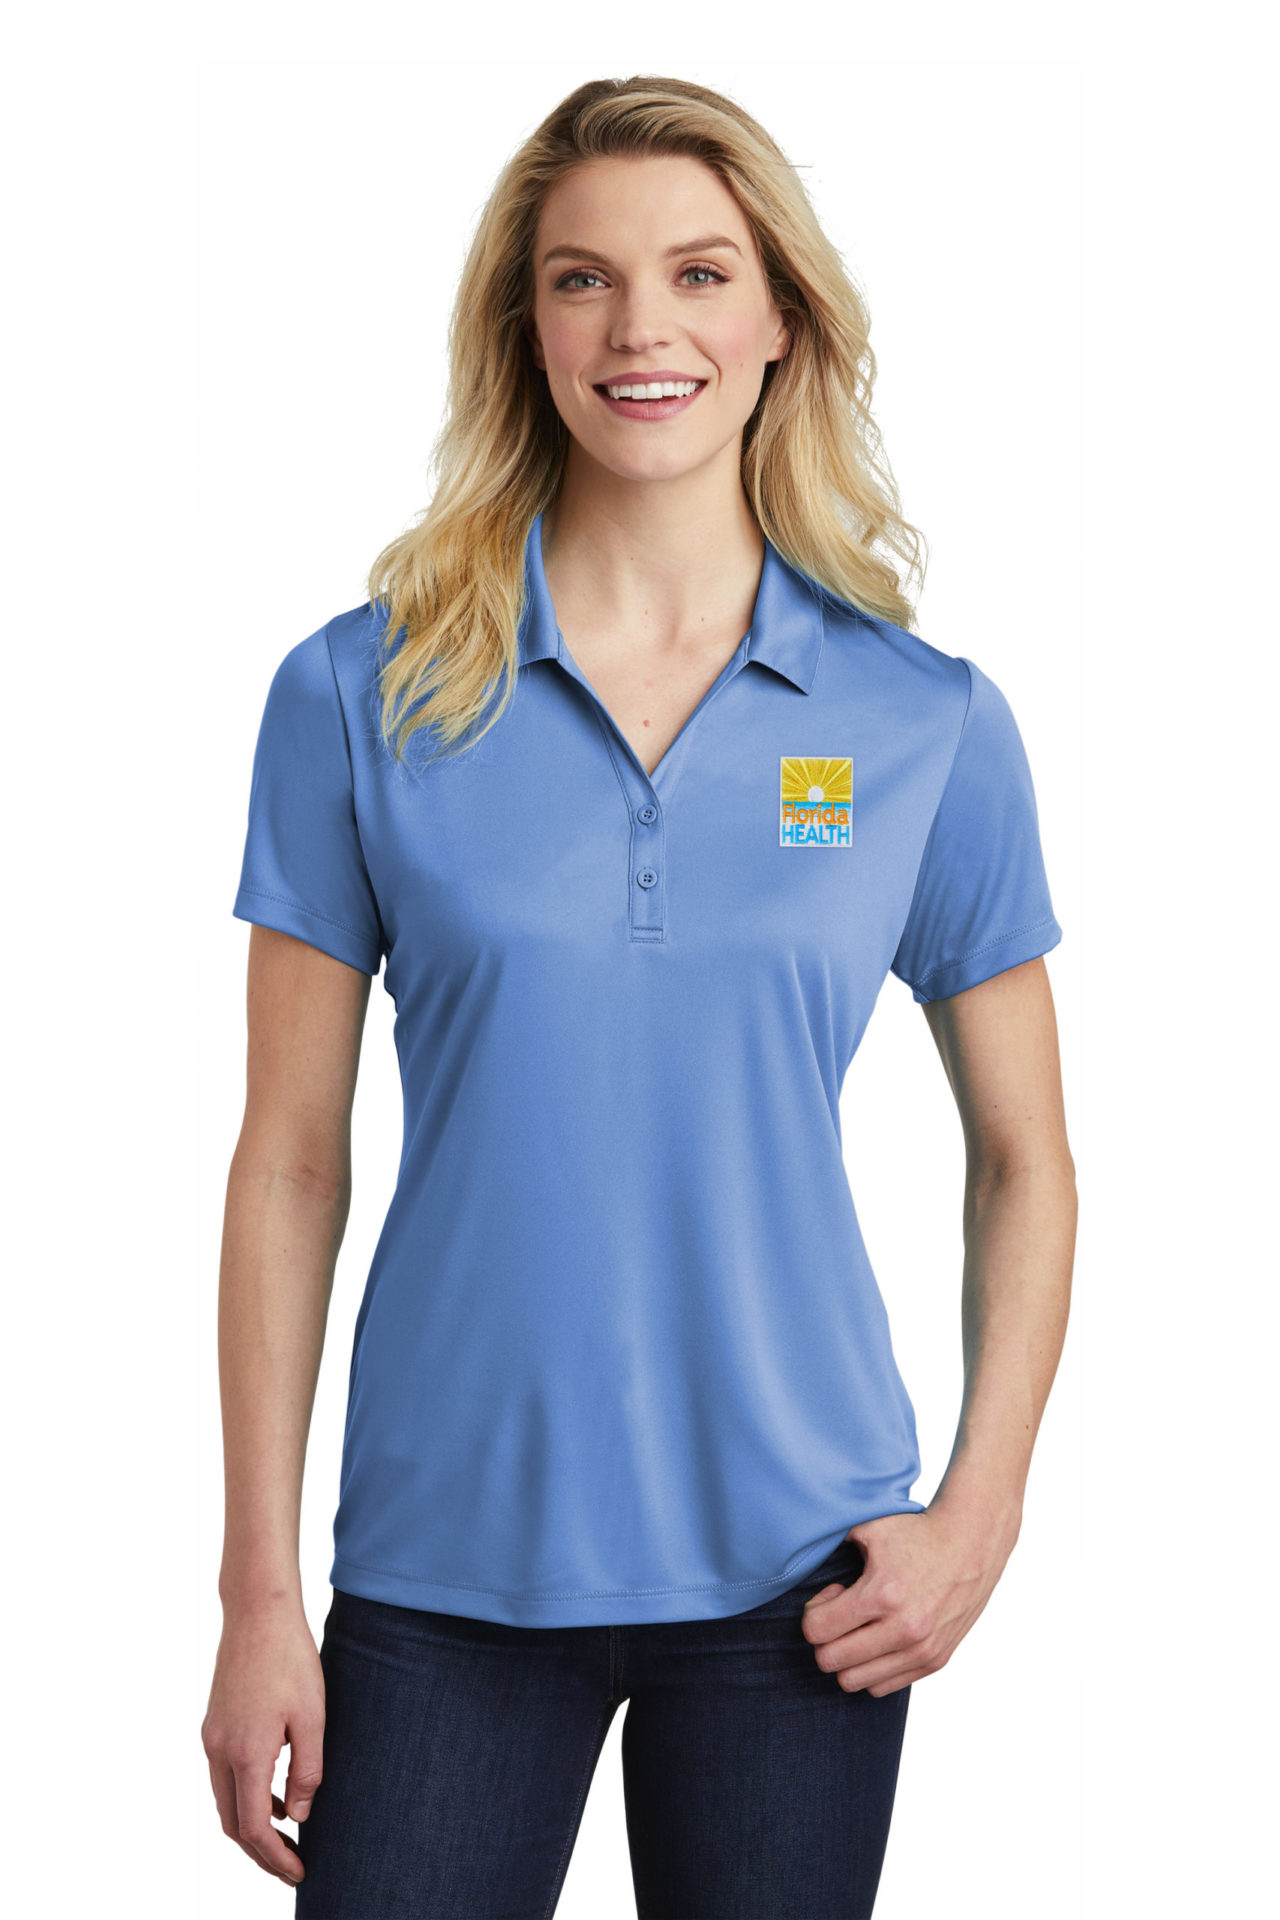 LST550 - Sport-Tek Ladies PosiCharge Competitor Polo - DOH Shirts